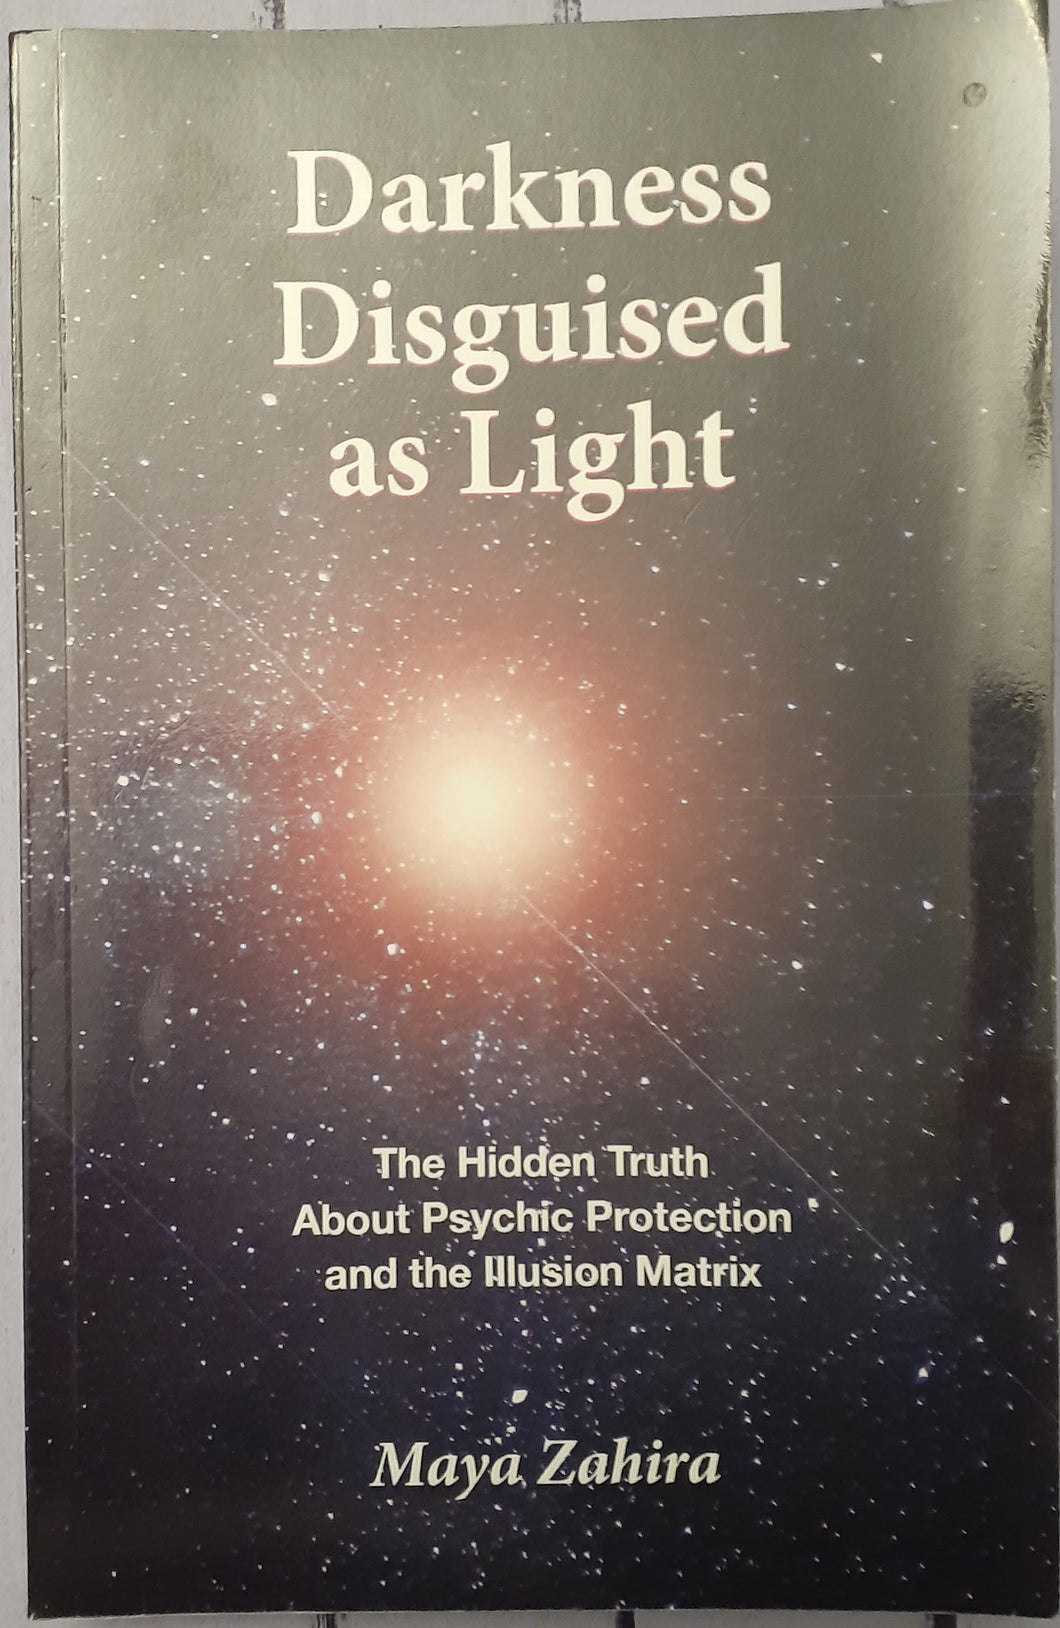 Darkness Disguised As Light: The Hidden Truth About Psychic Protection and the Illusion Matrix